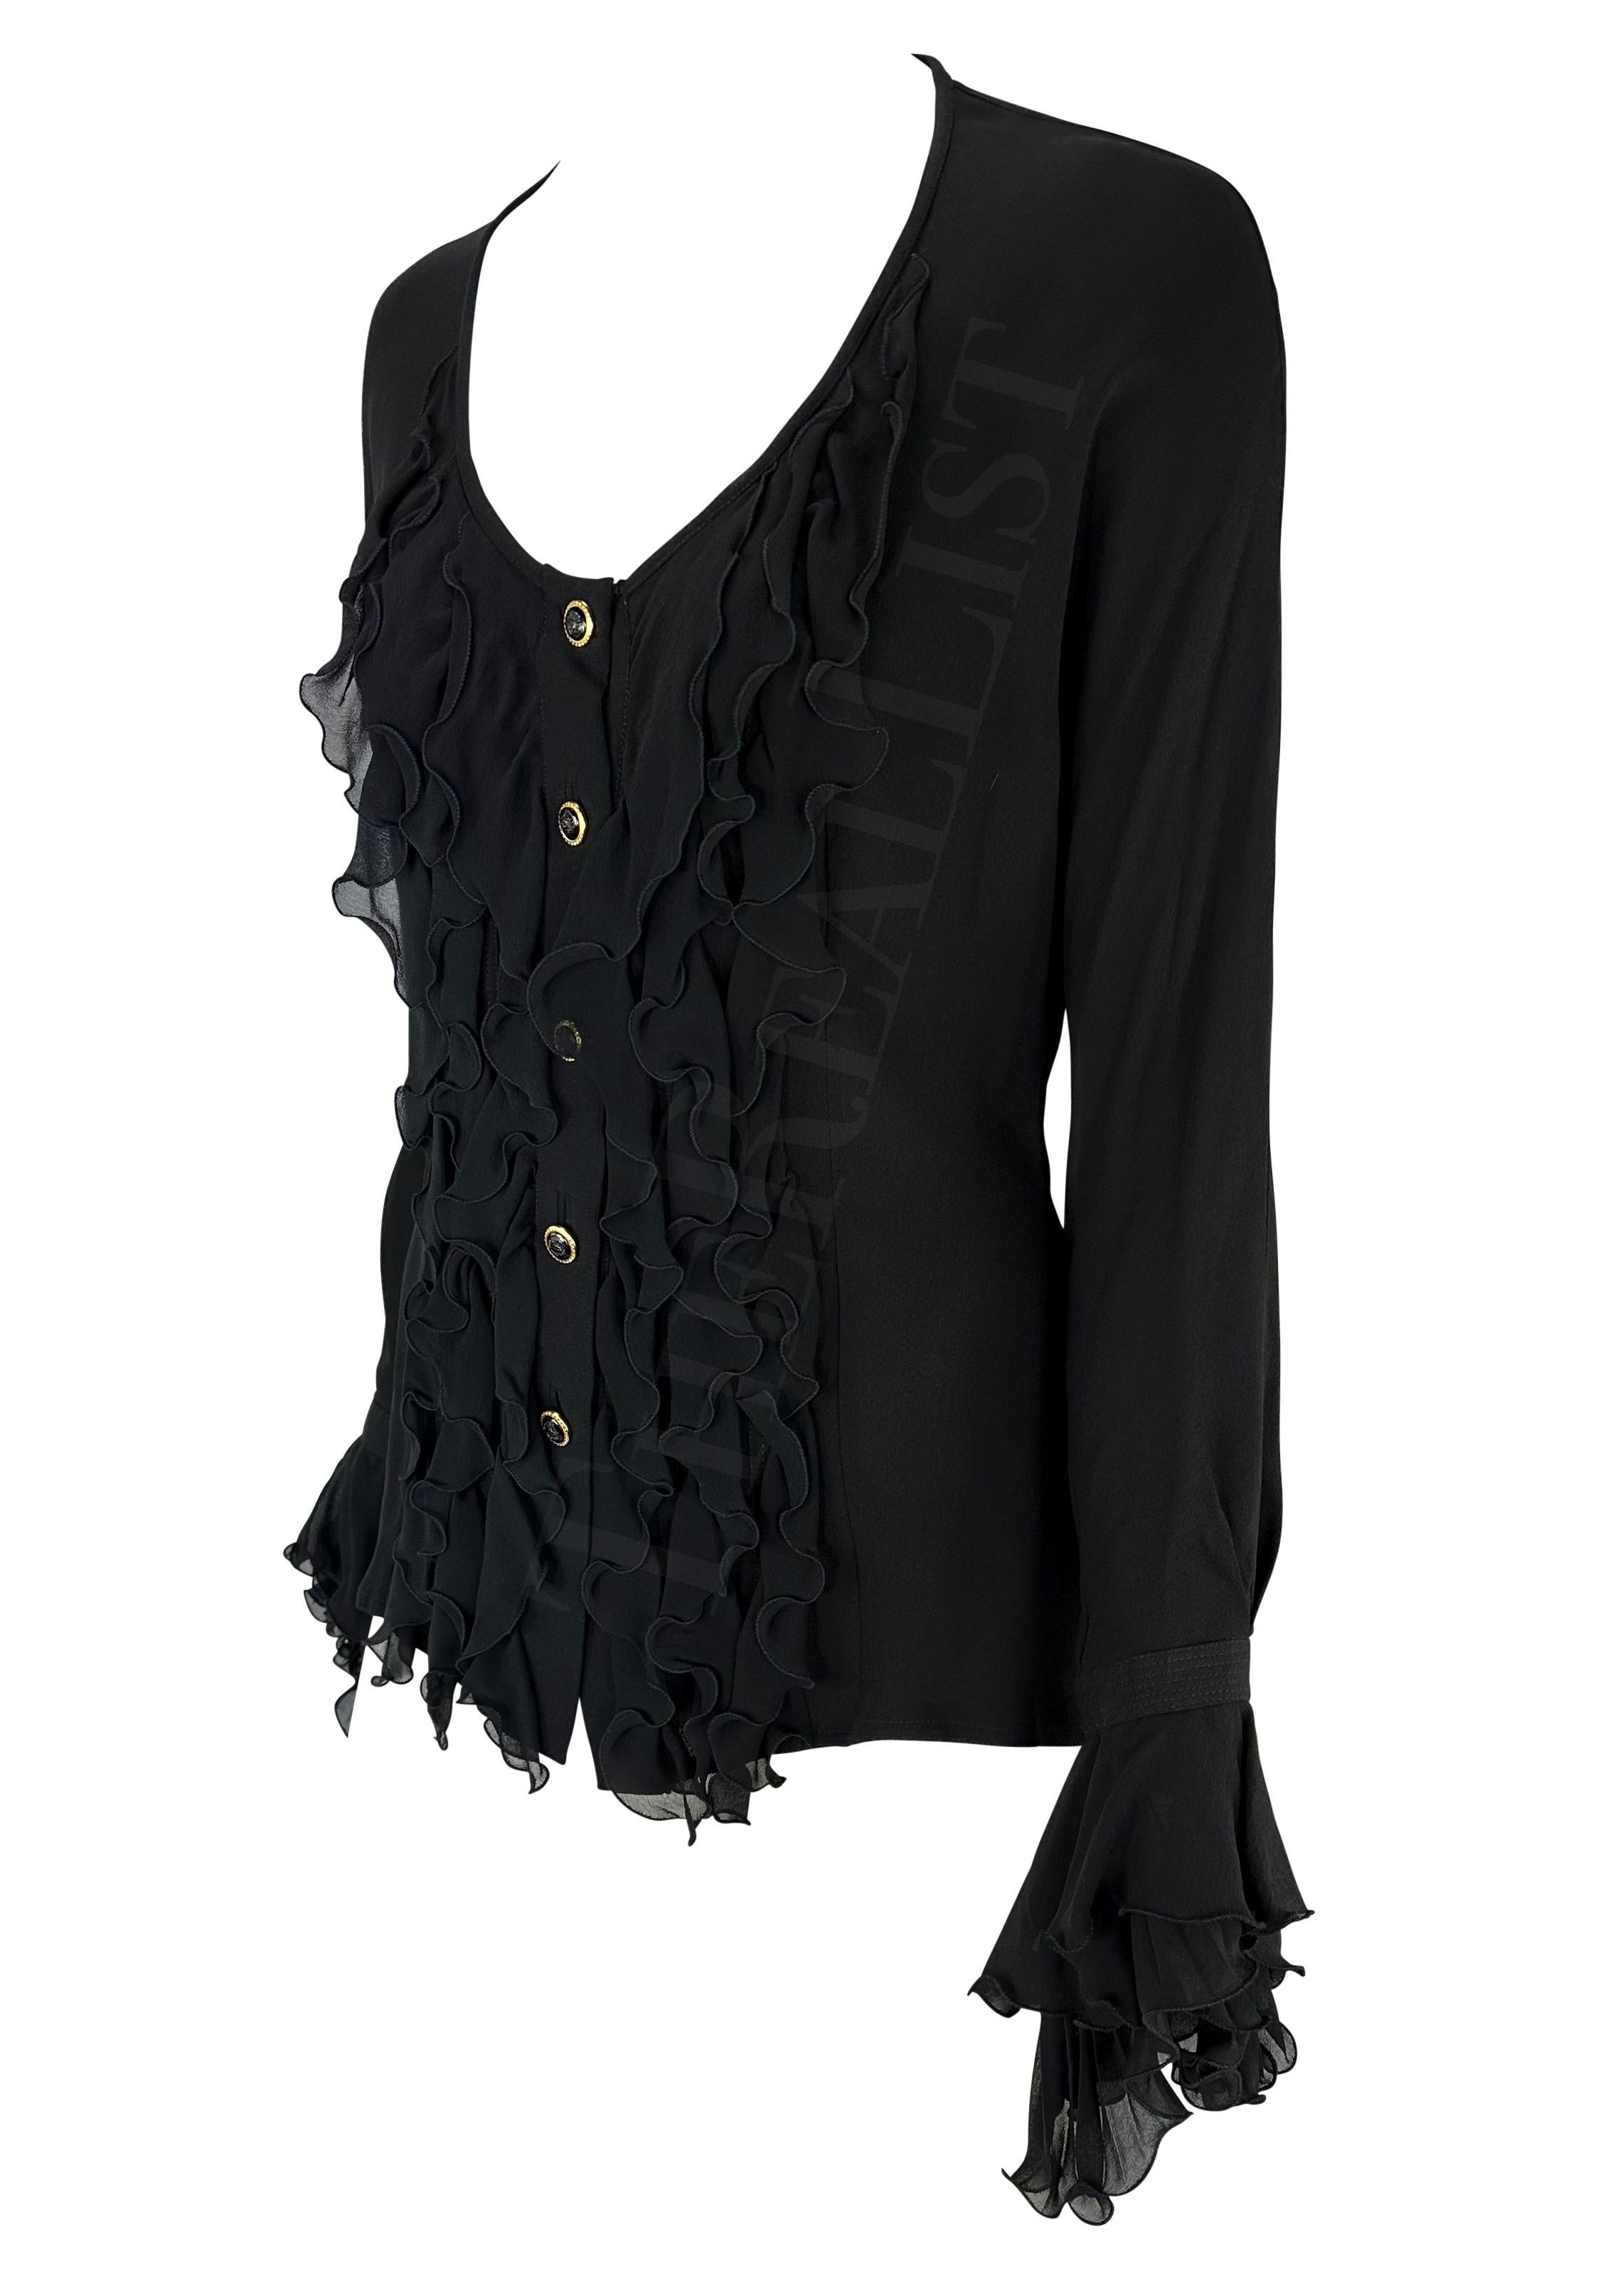 S/S 1993 Gianni Versace Black Bohemian Ruffle Button Runway Down Top In Excellent Condition For Sale In West Hollywood, CA